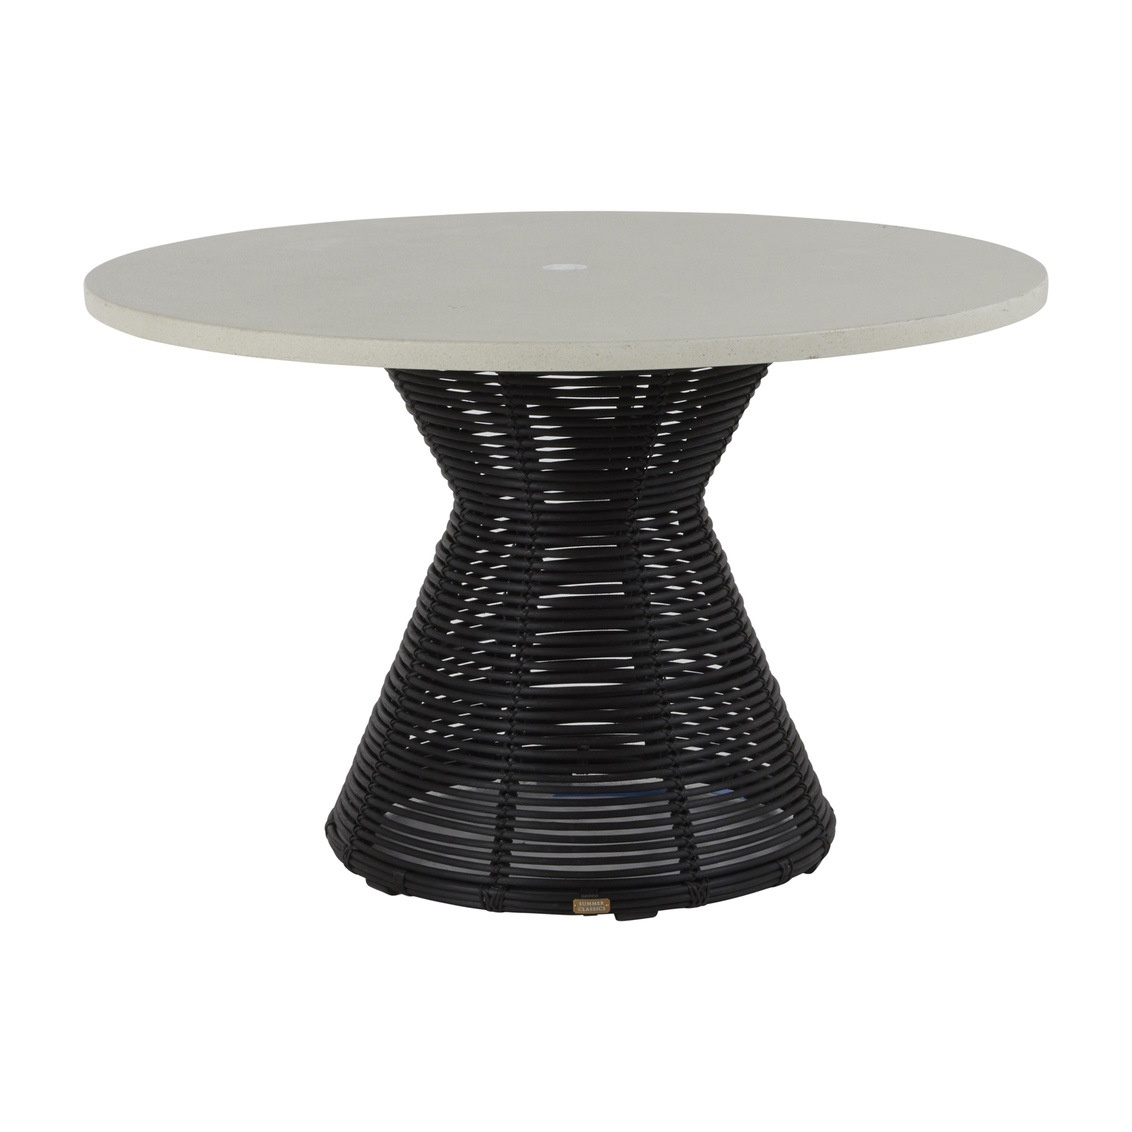 harris round dining table in travertine superstone top (w/ umbrella hole) and onyx woven base product image